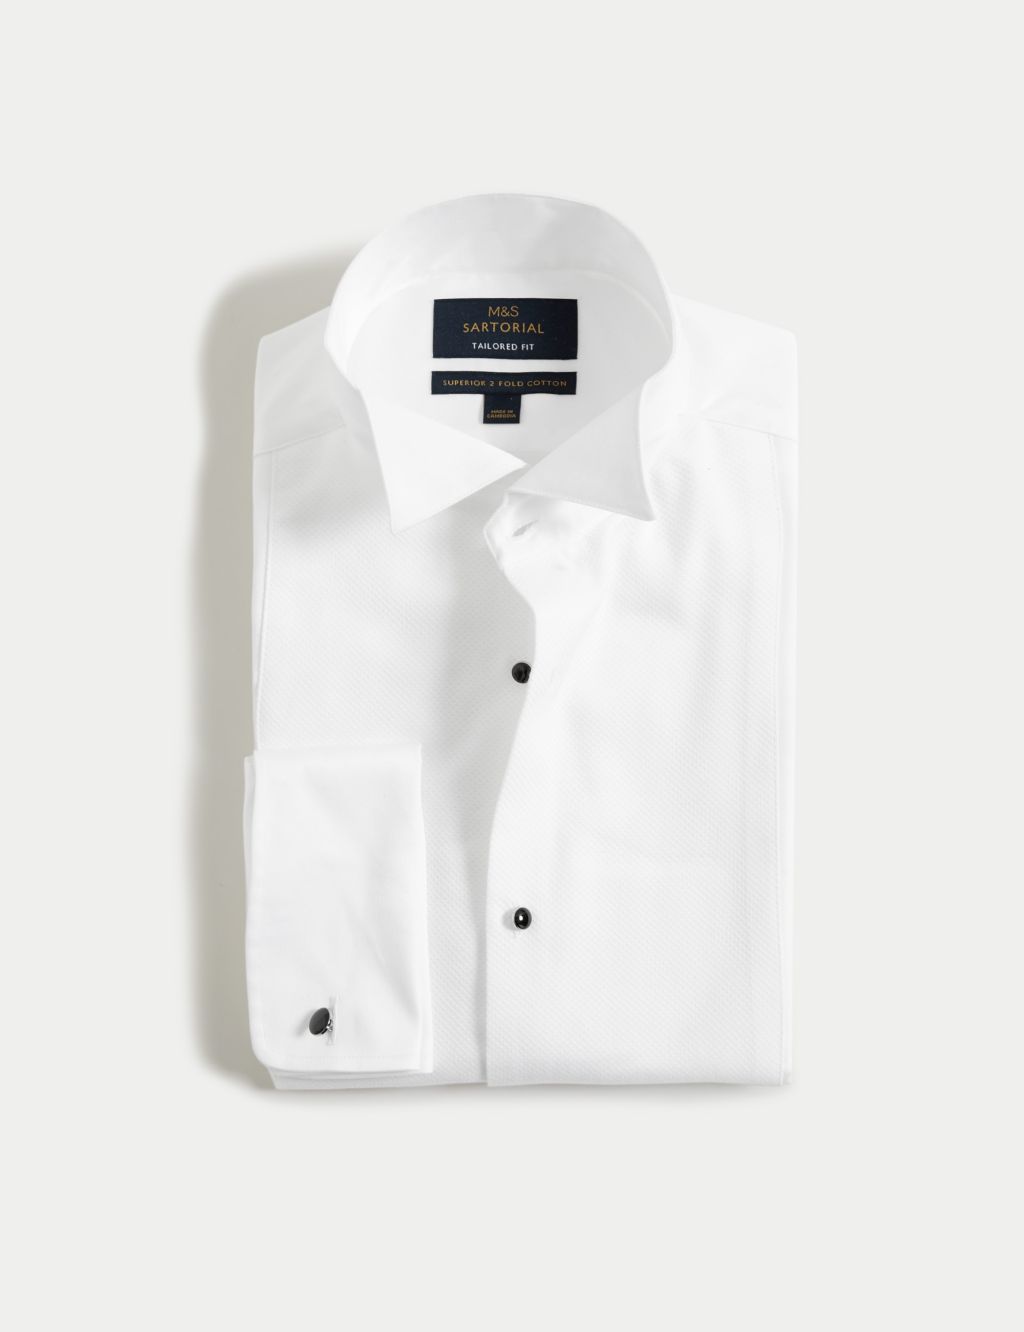 Tailored Fit Pure Cotton Dinner Shirt image 1